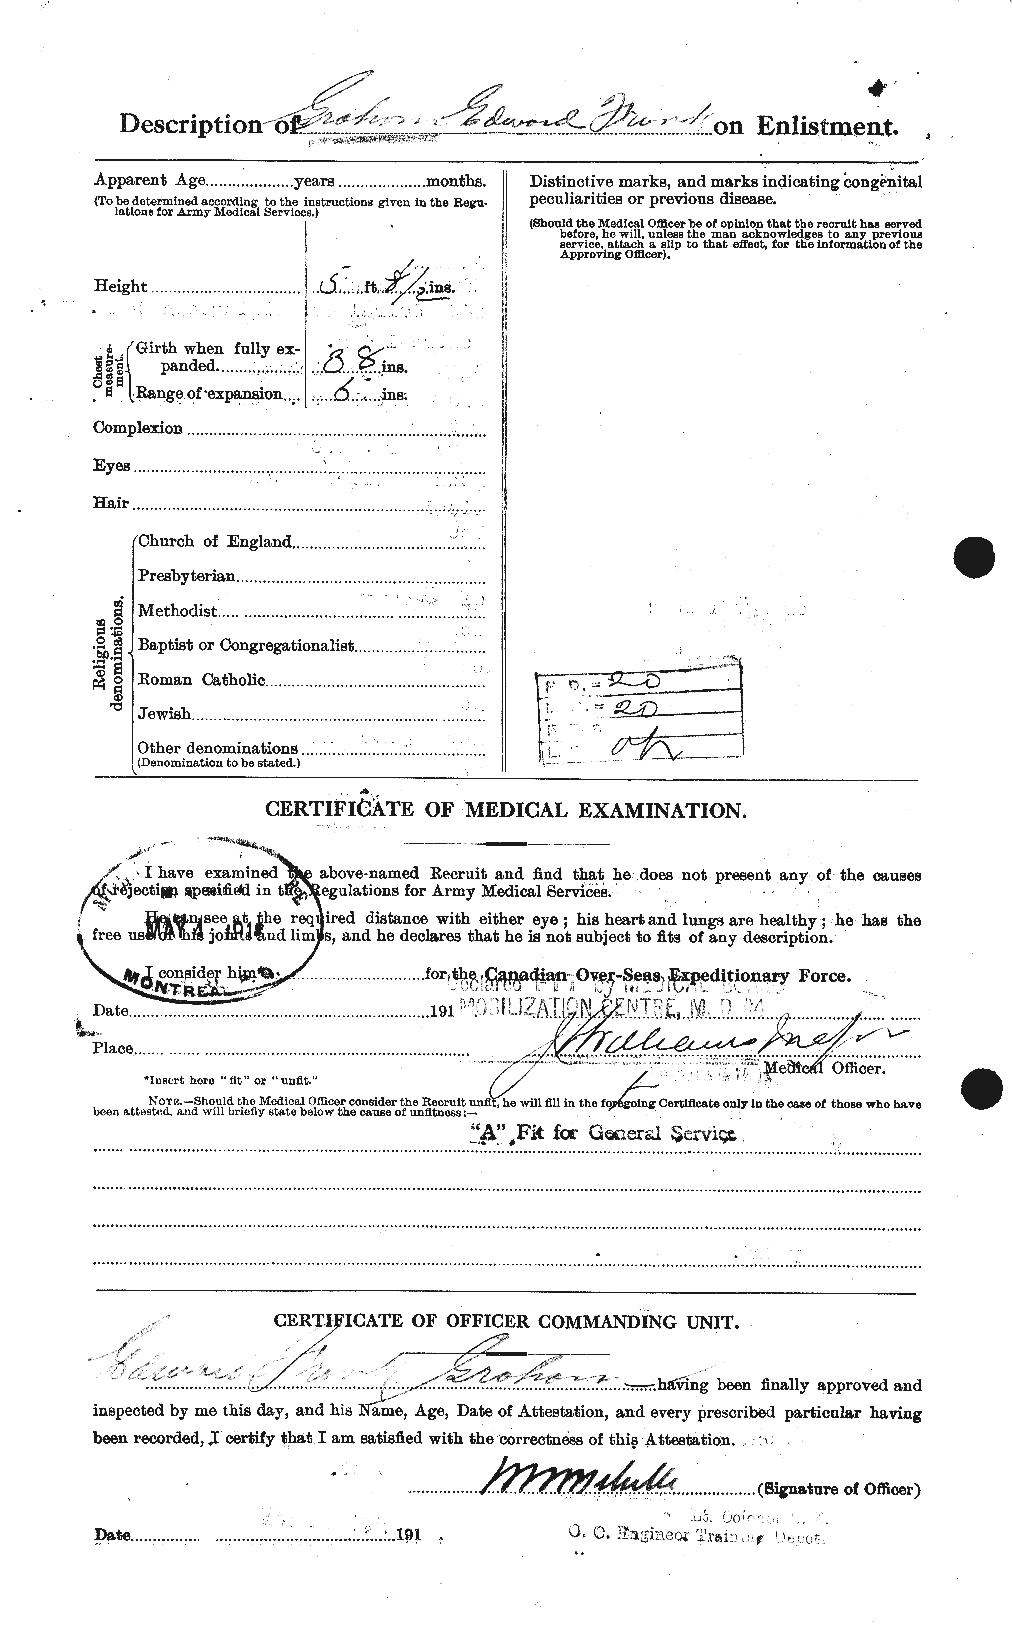 Personnel Records of the First World War - CEF 353868b